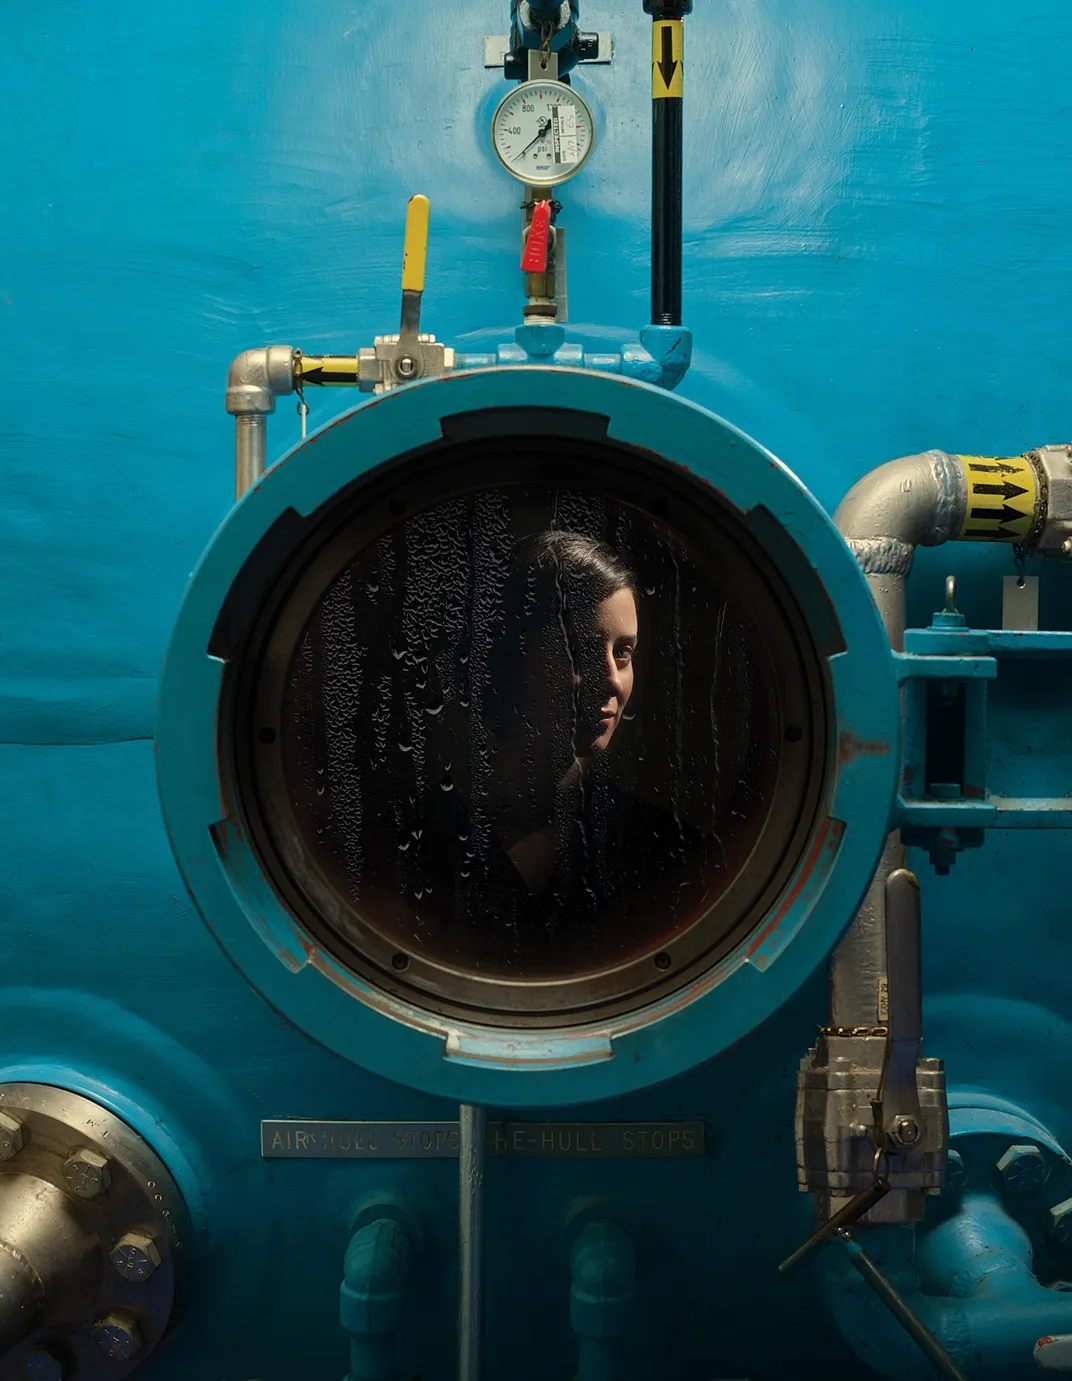 Rachel Lance looking out of a porthole of a hyperbaric chamber